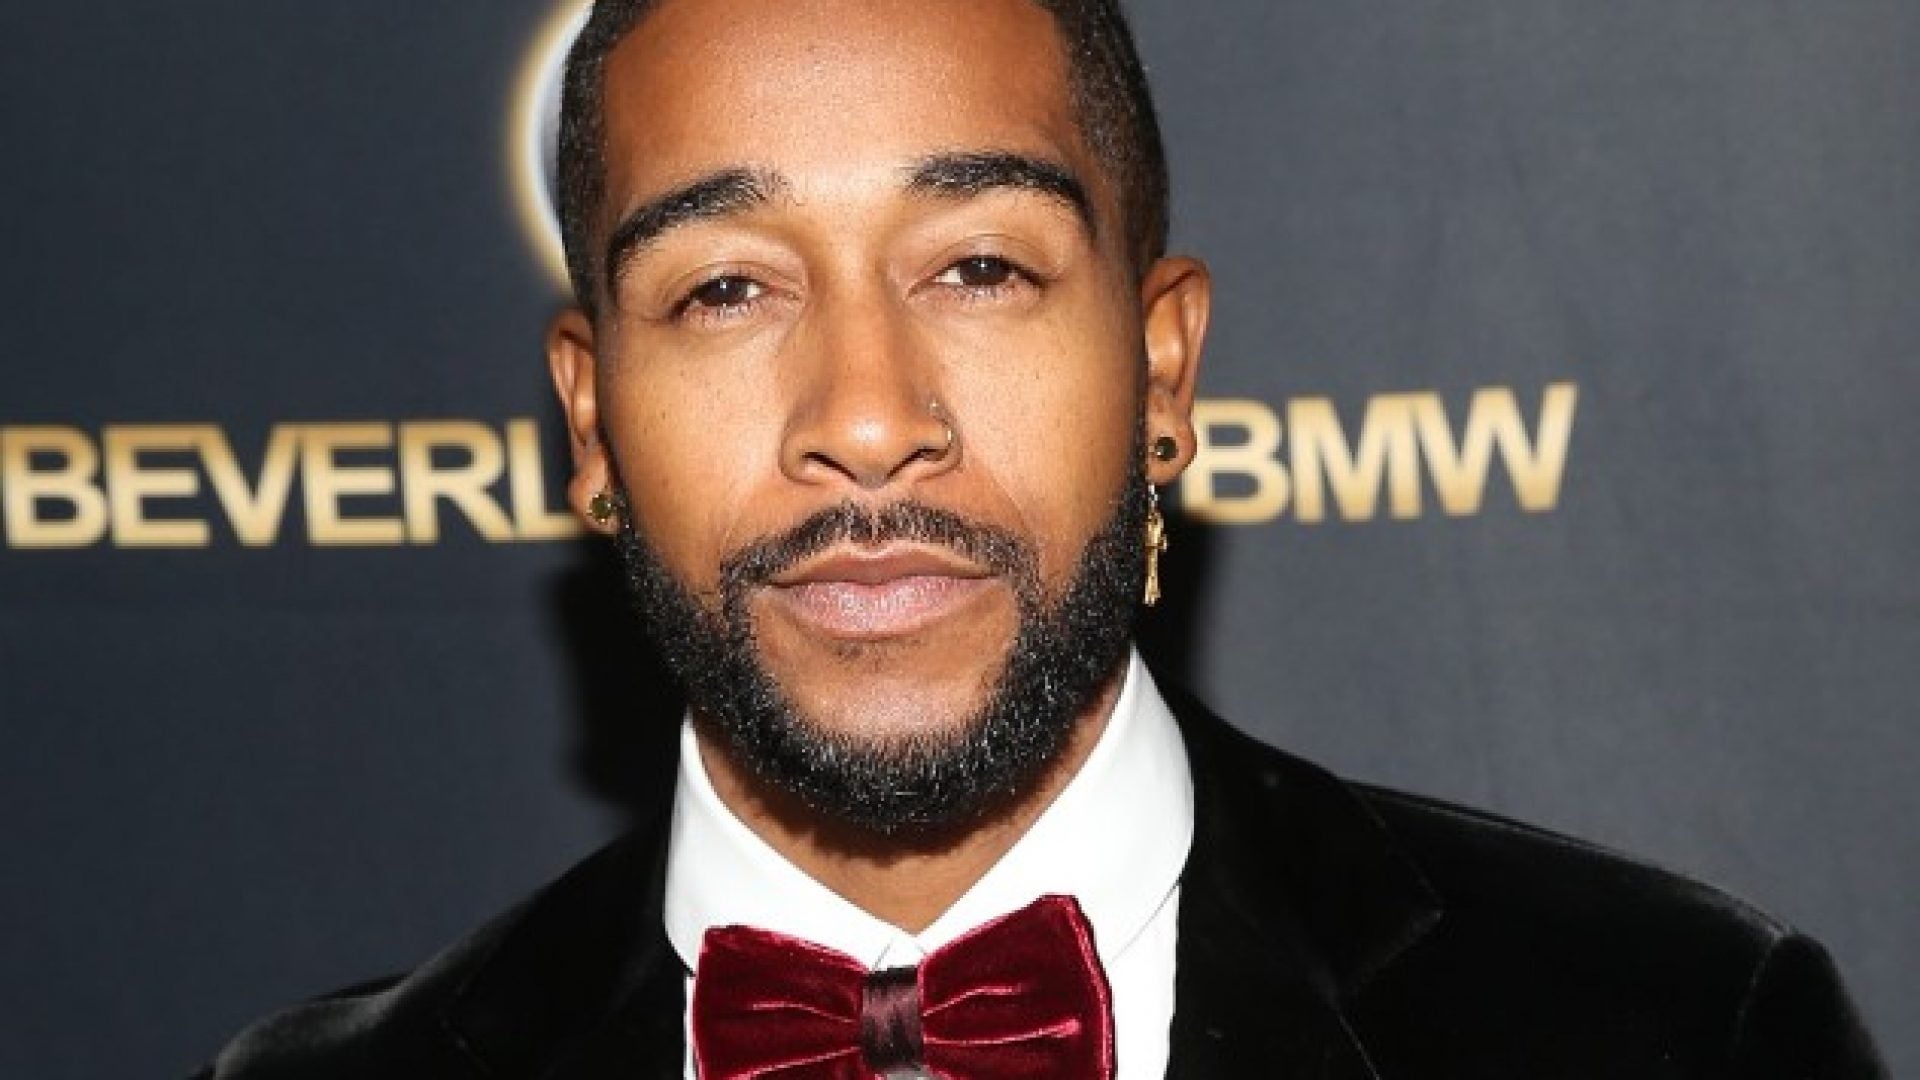 Omarion Keeps His Skin Glowing And Unbothered With This Product